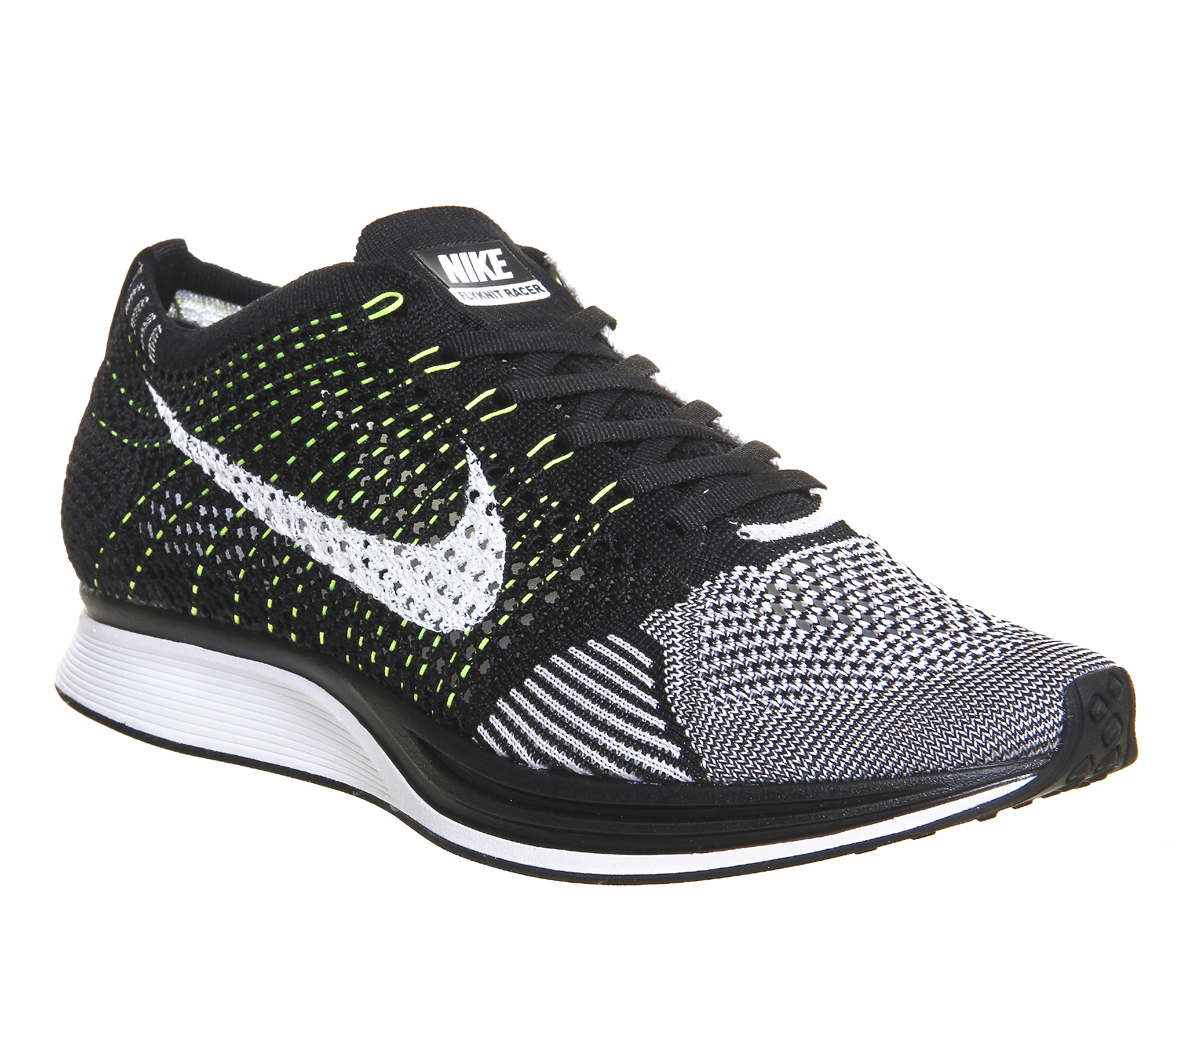 Nike Flyknit Racer Black White White - His trainers